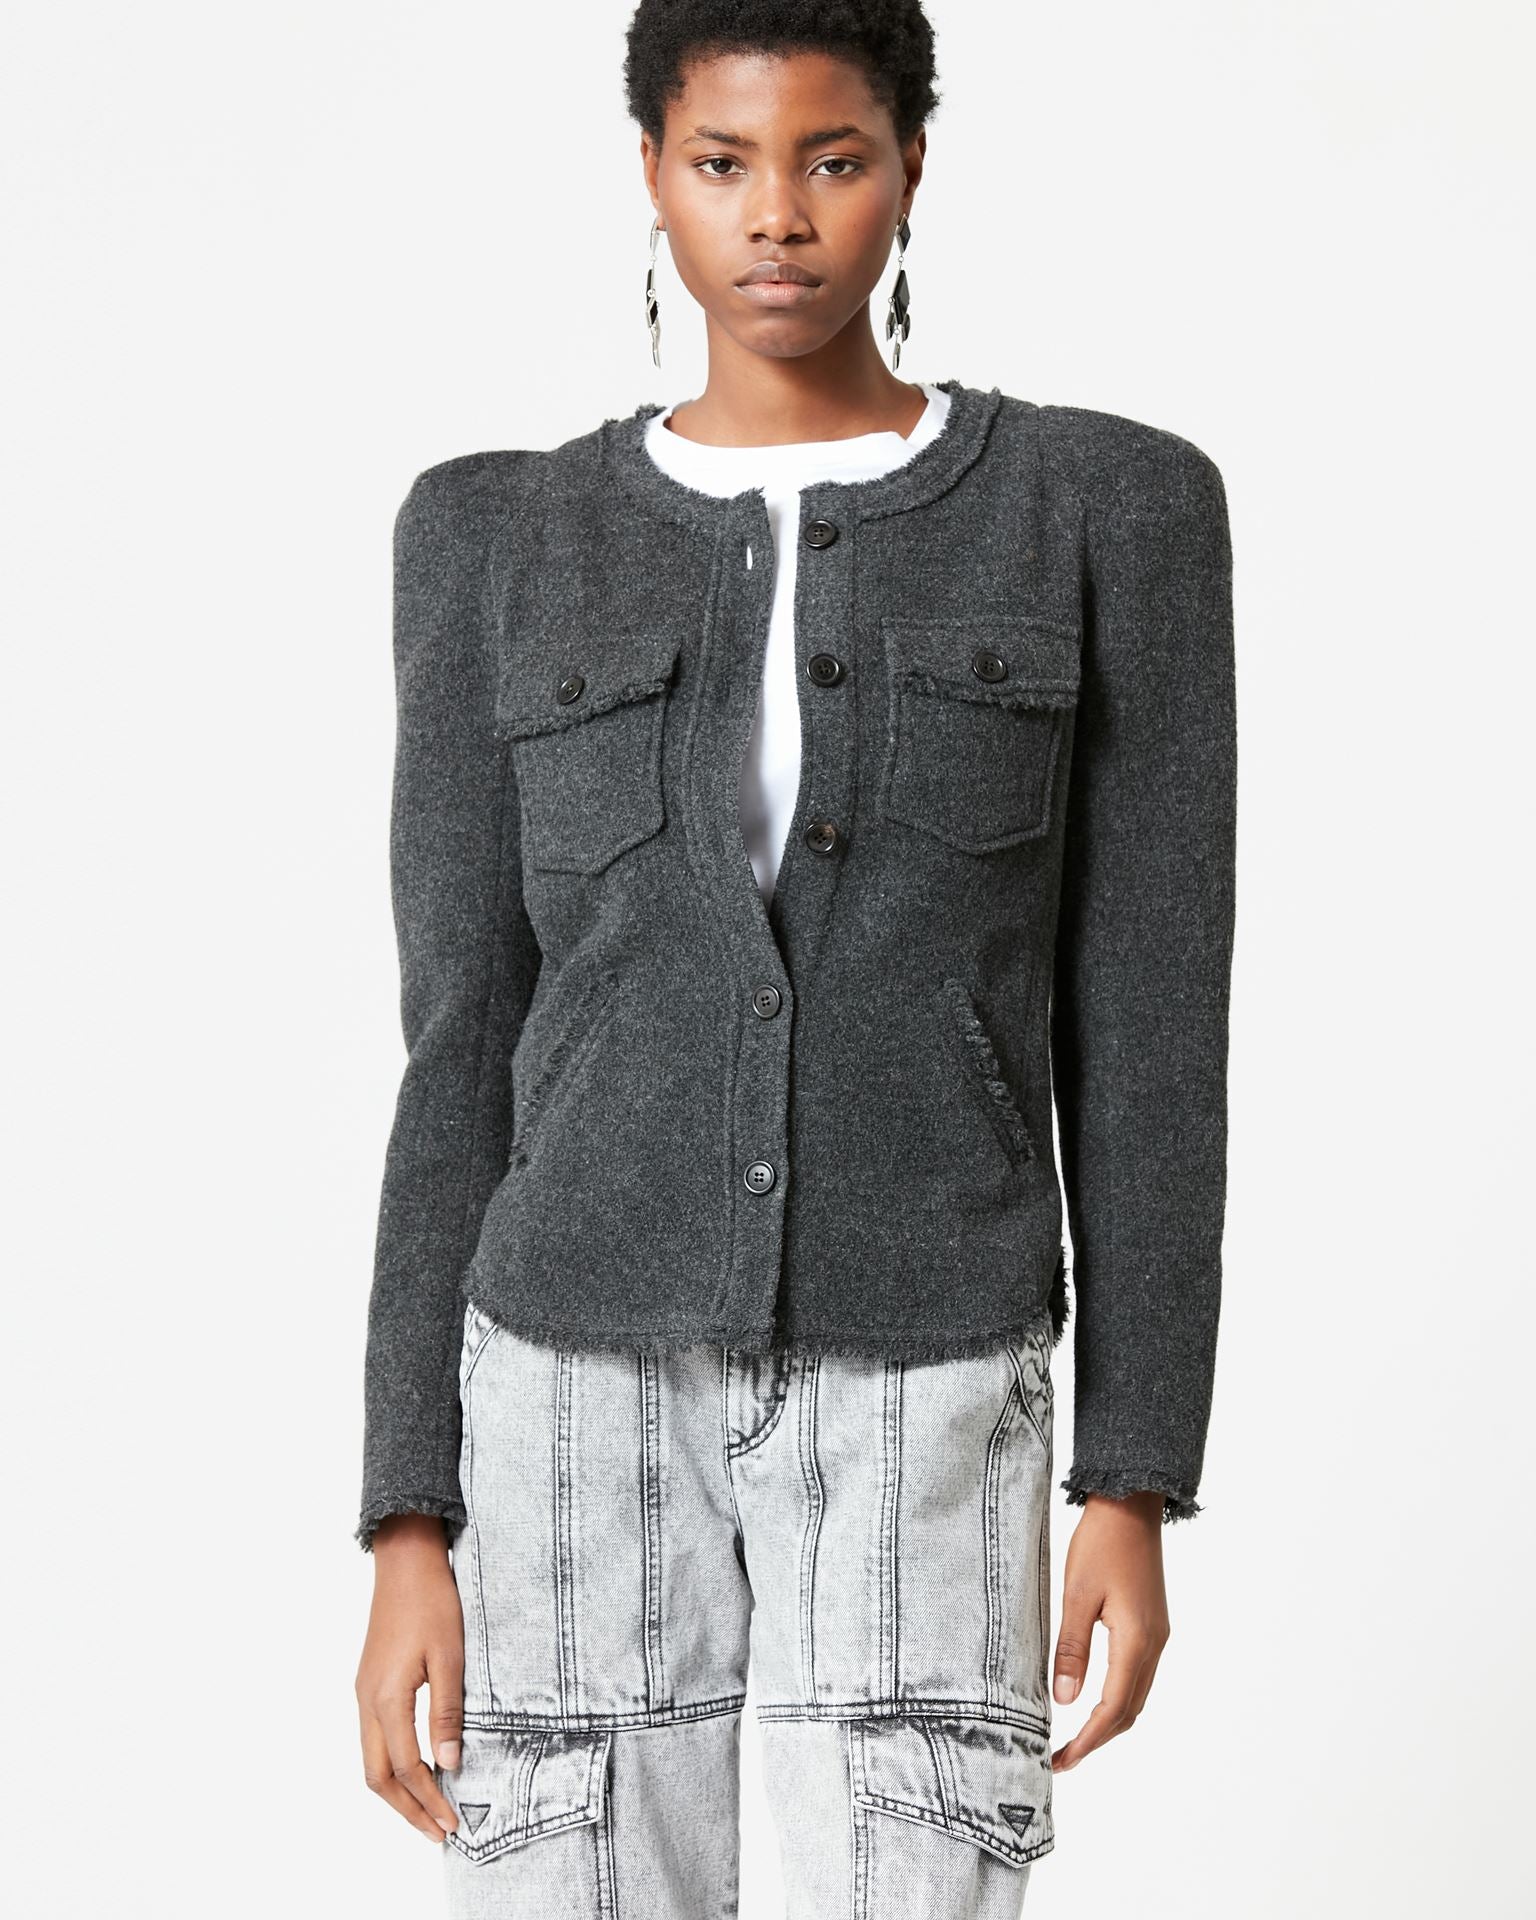 Nelly jacket, anthracite